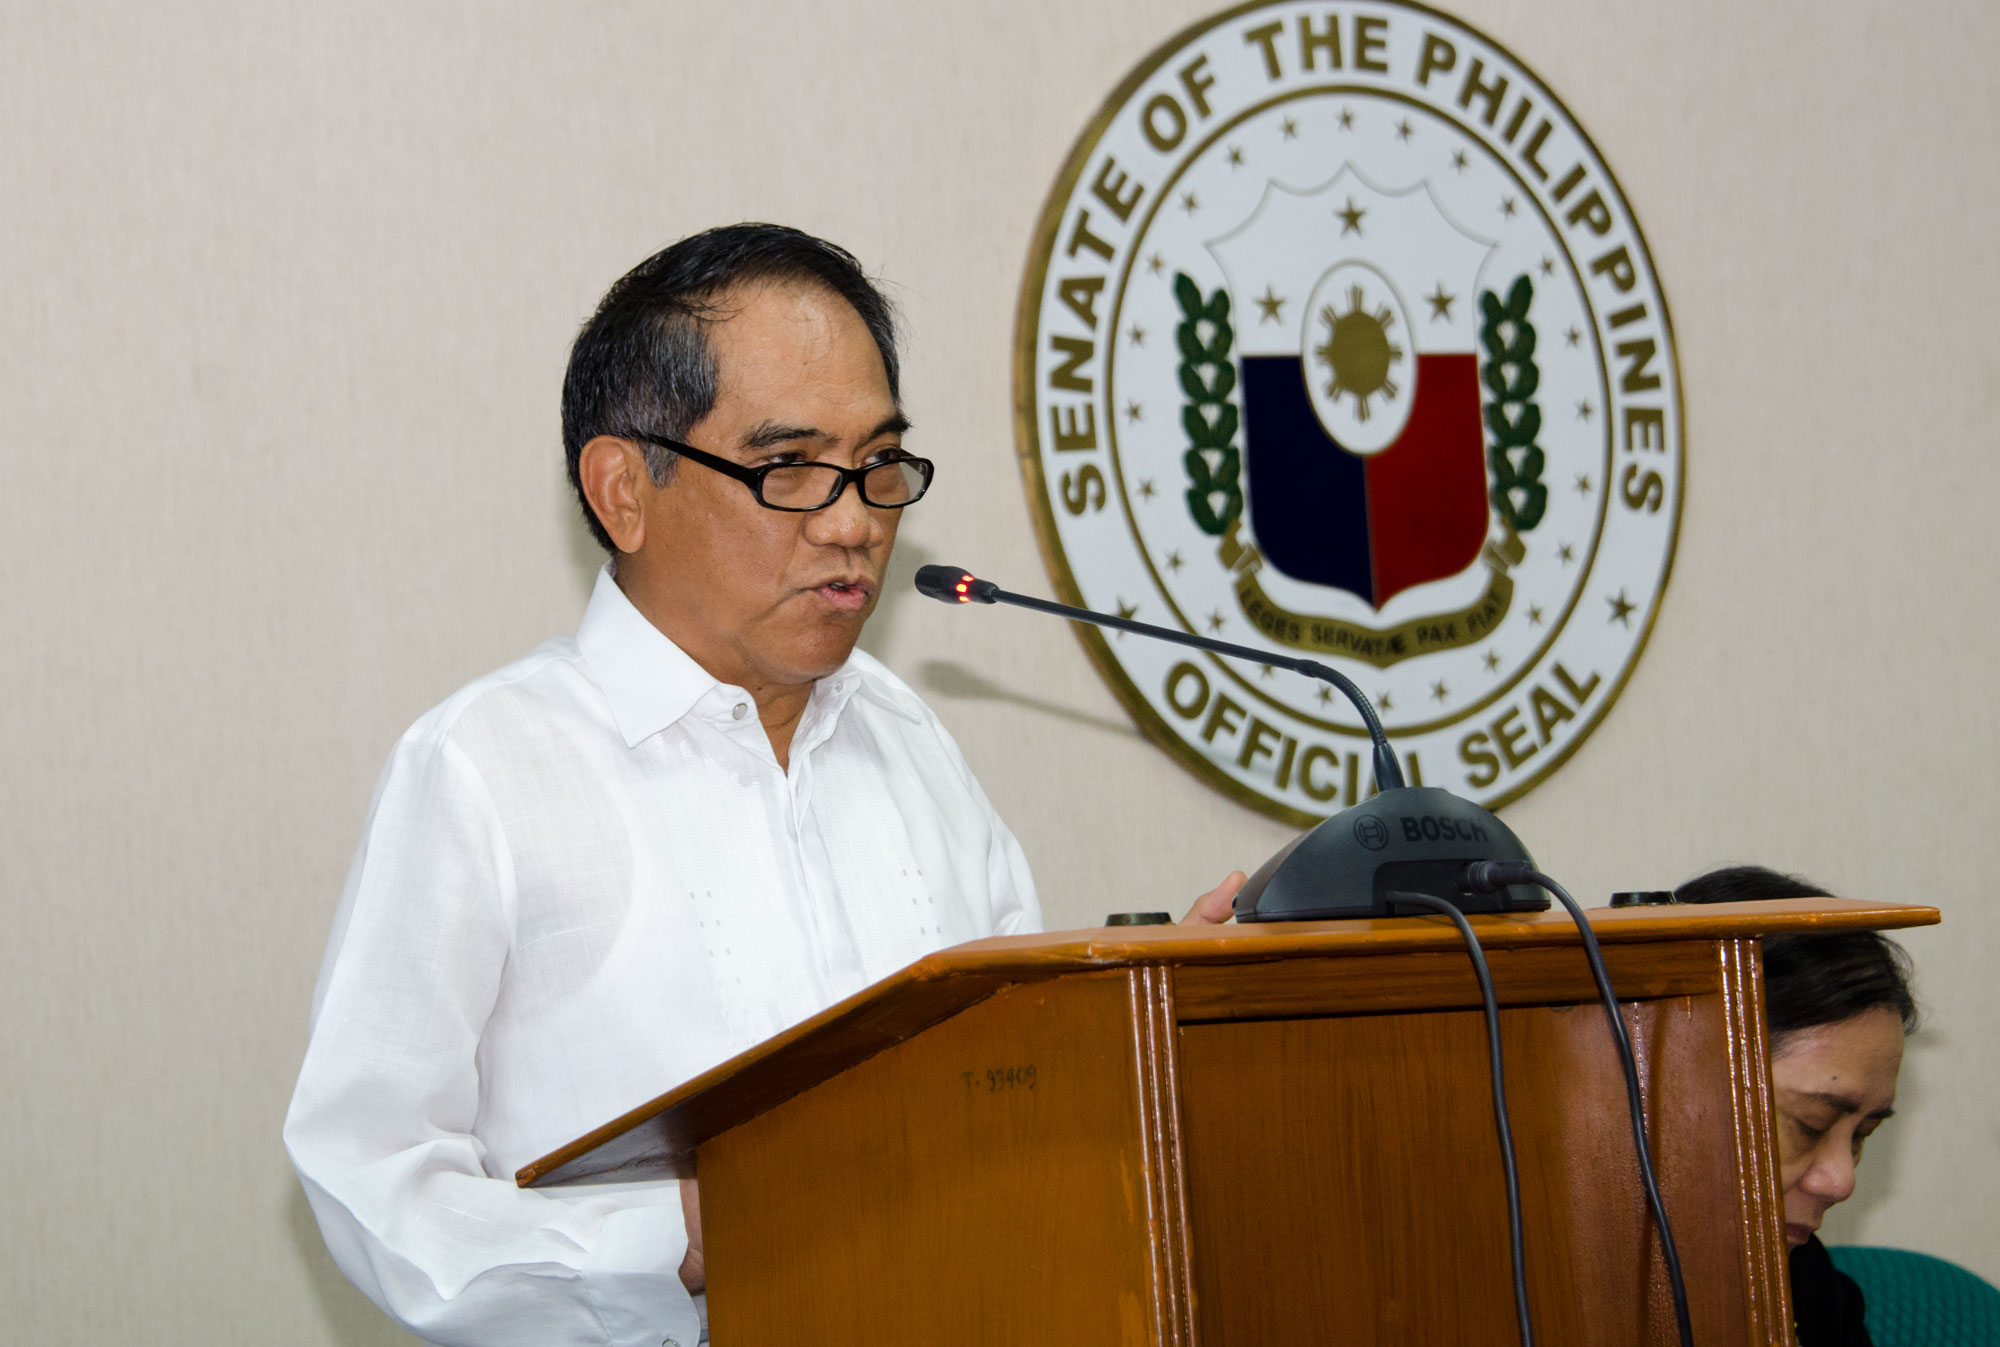 Senate Centennial Lecture Series “Assessment of the Bottom-up Budgeting Process for FY 2015-ggm_7861.jpg